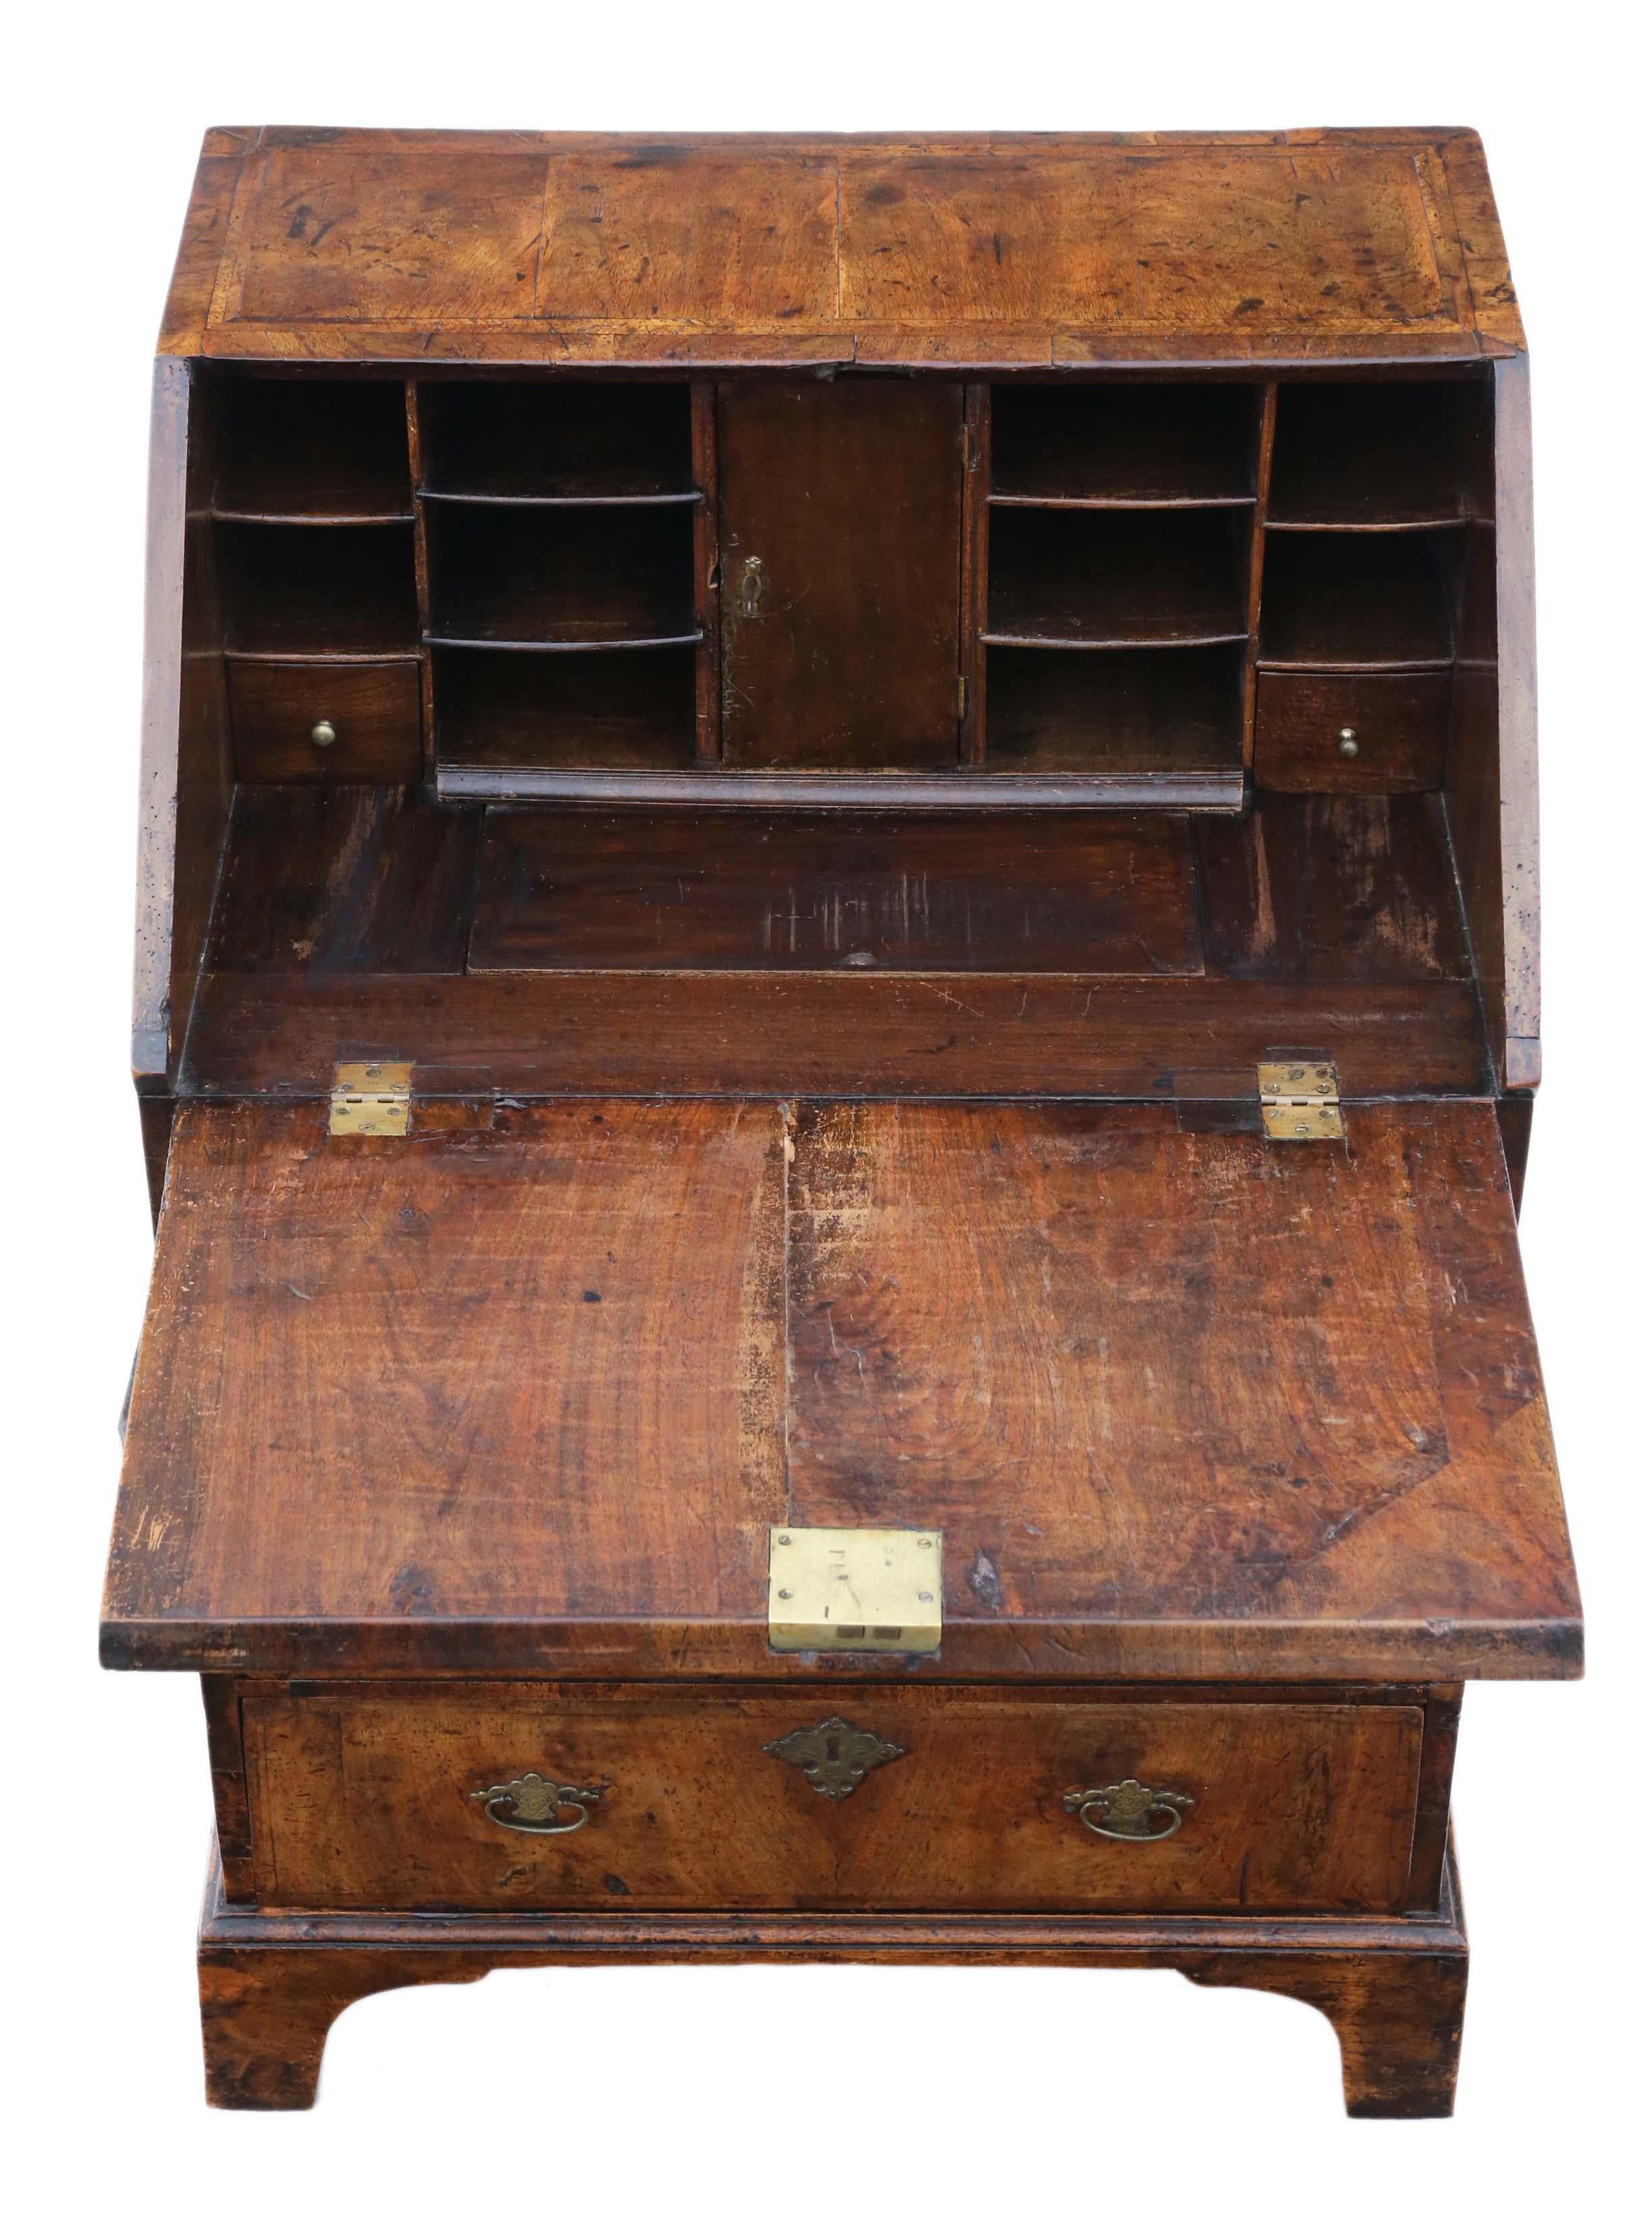 Antique Georgian walnut and fruitwood drop well bureau desk writing table early 18th Century.

This is a lovely bureau, that is full of age, charm and character.

No loose joints and the drawers slide freely. We have keys for the fall front and